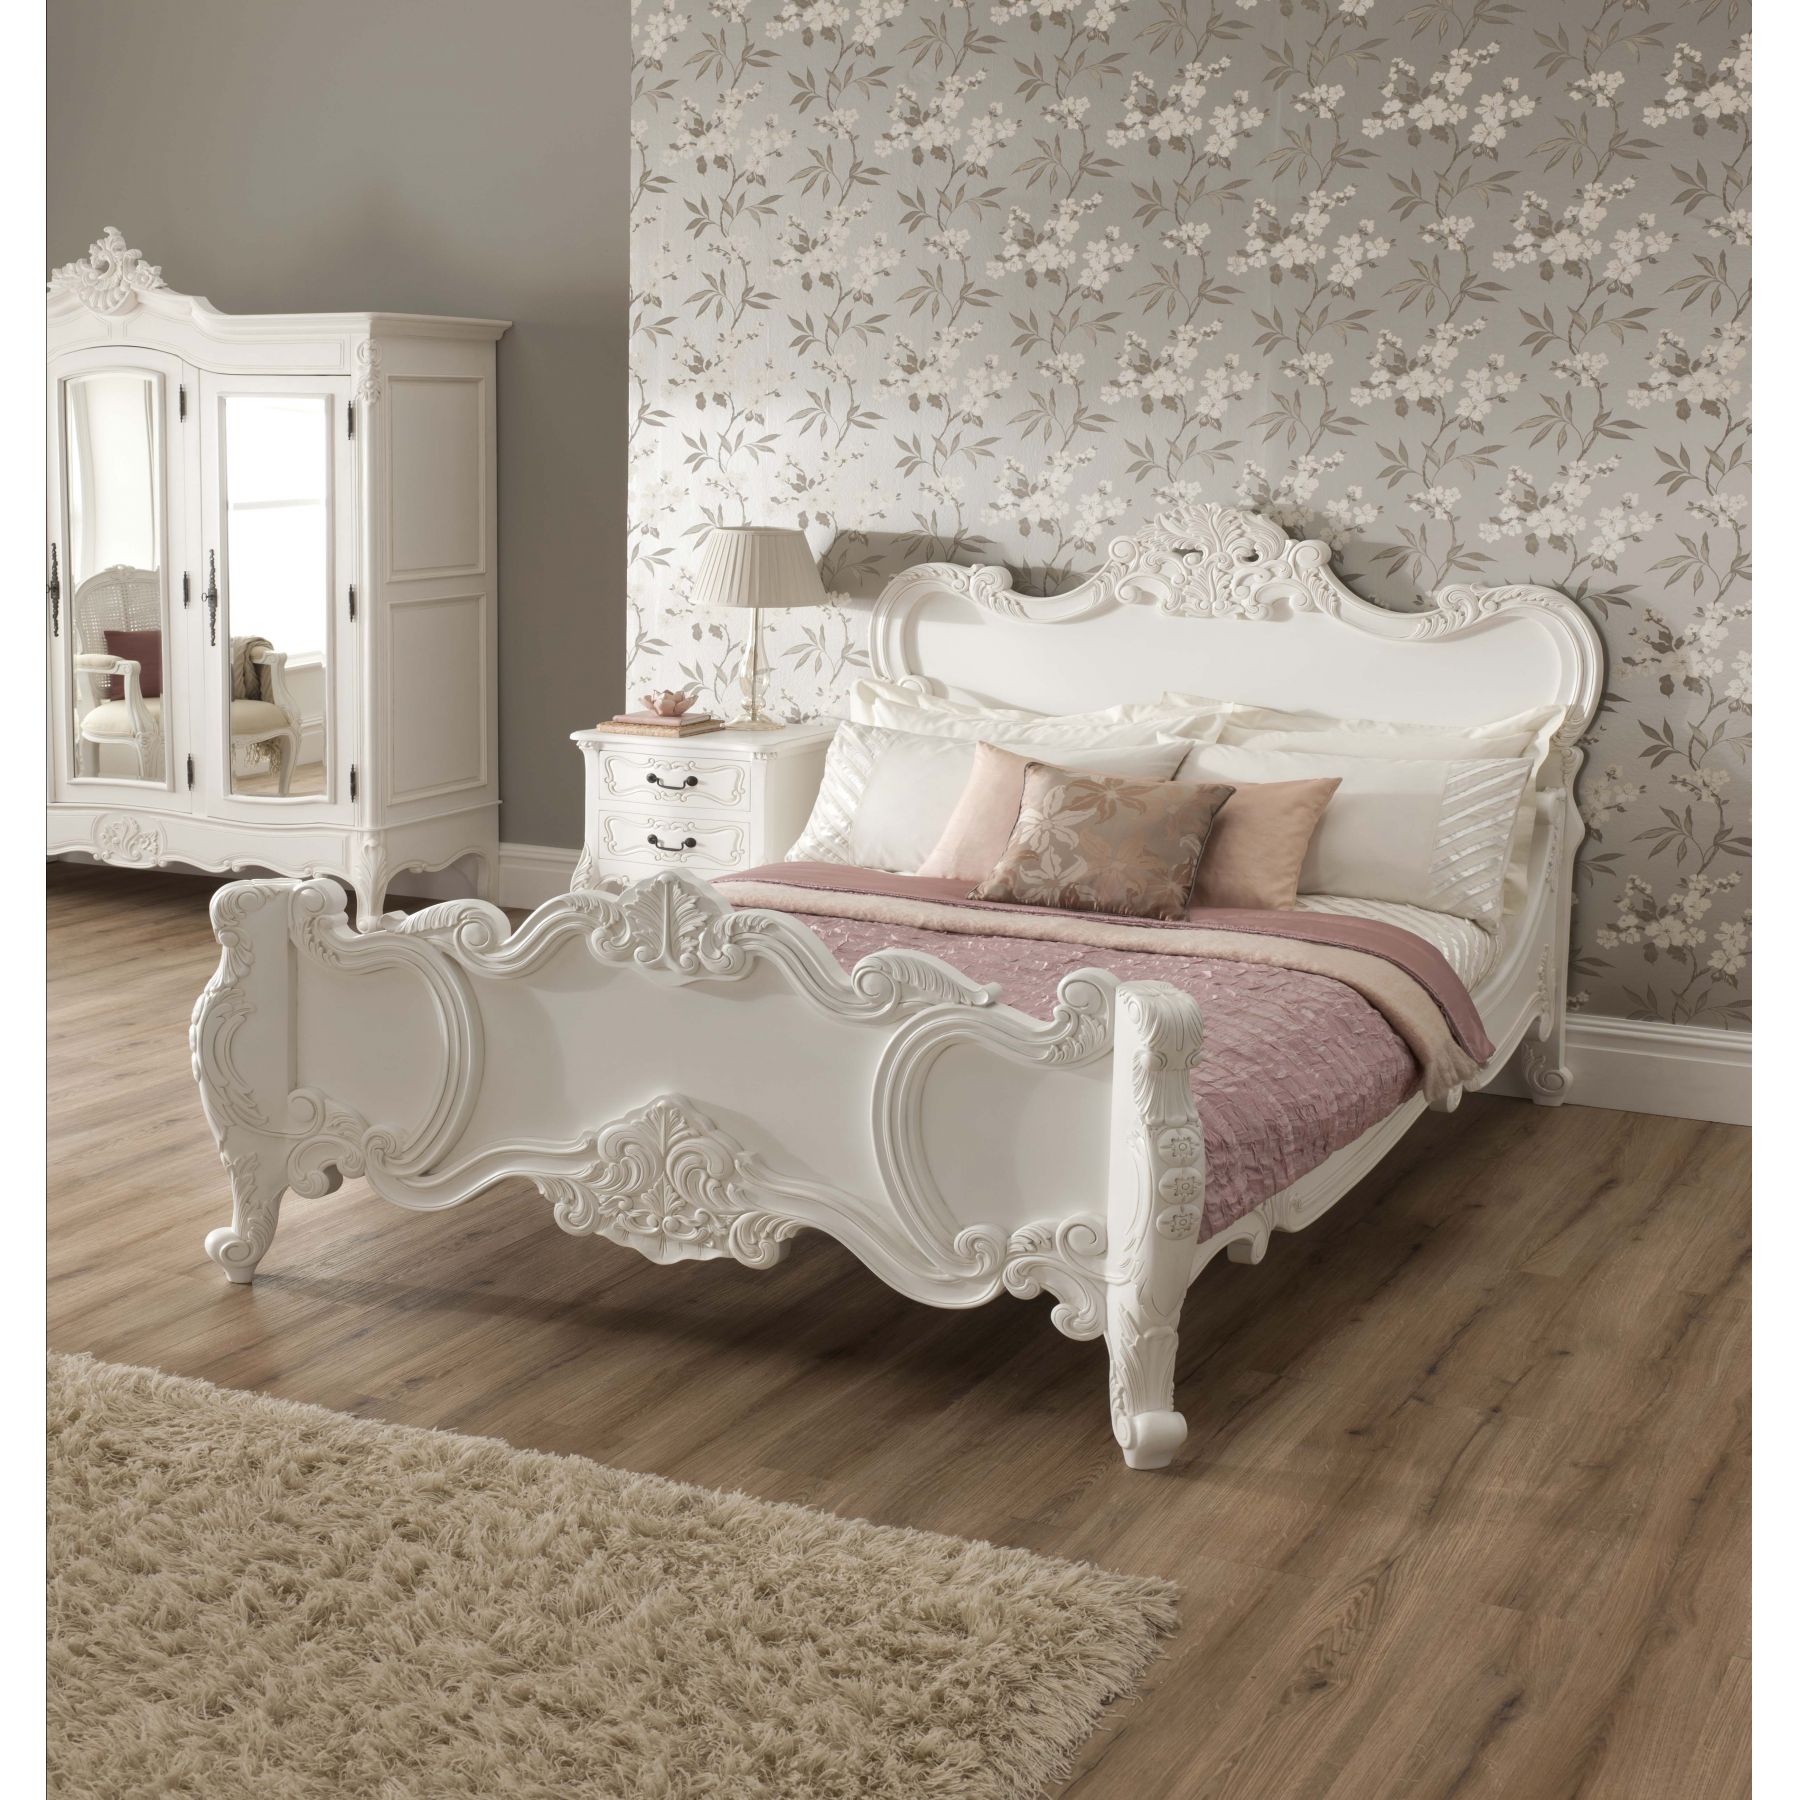 Shabby Chic Bedroom Furniture With Antique Frames - White French Provincial  Beds - 1800x1800 Wallpaper 